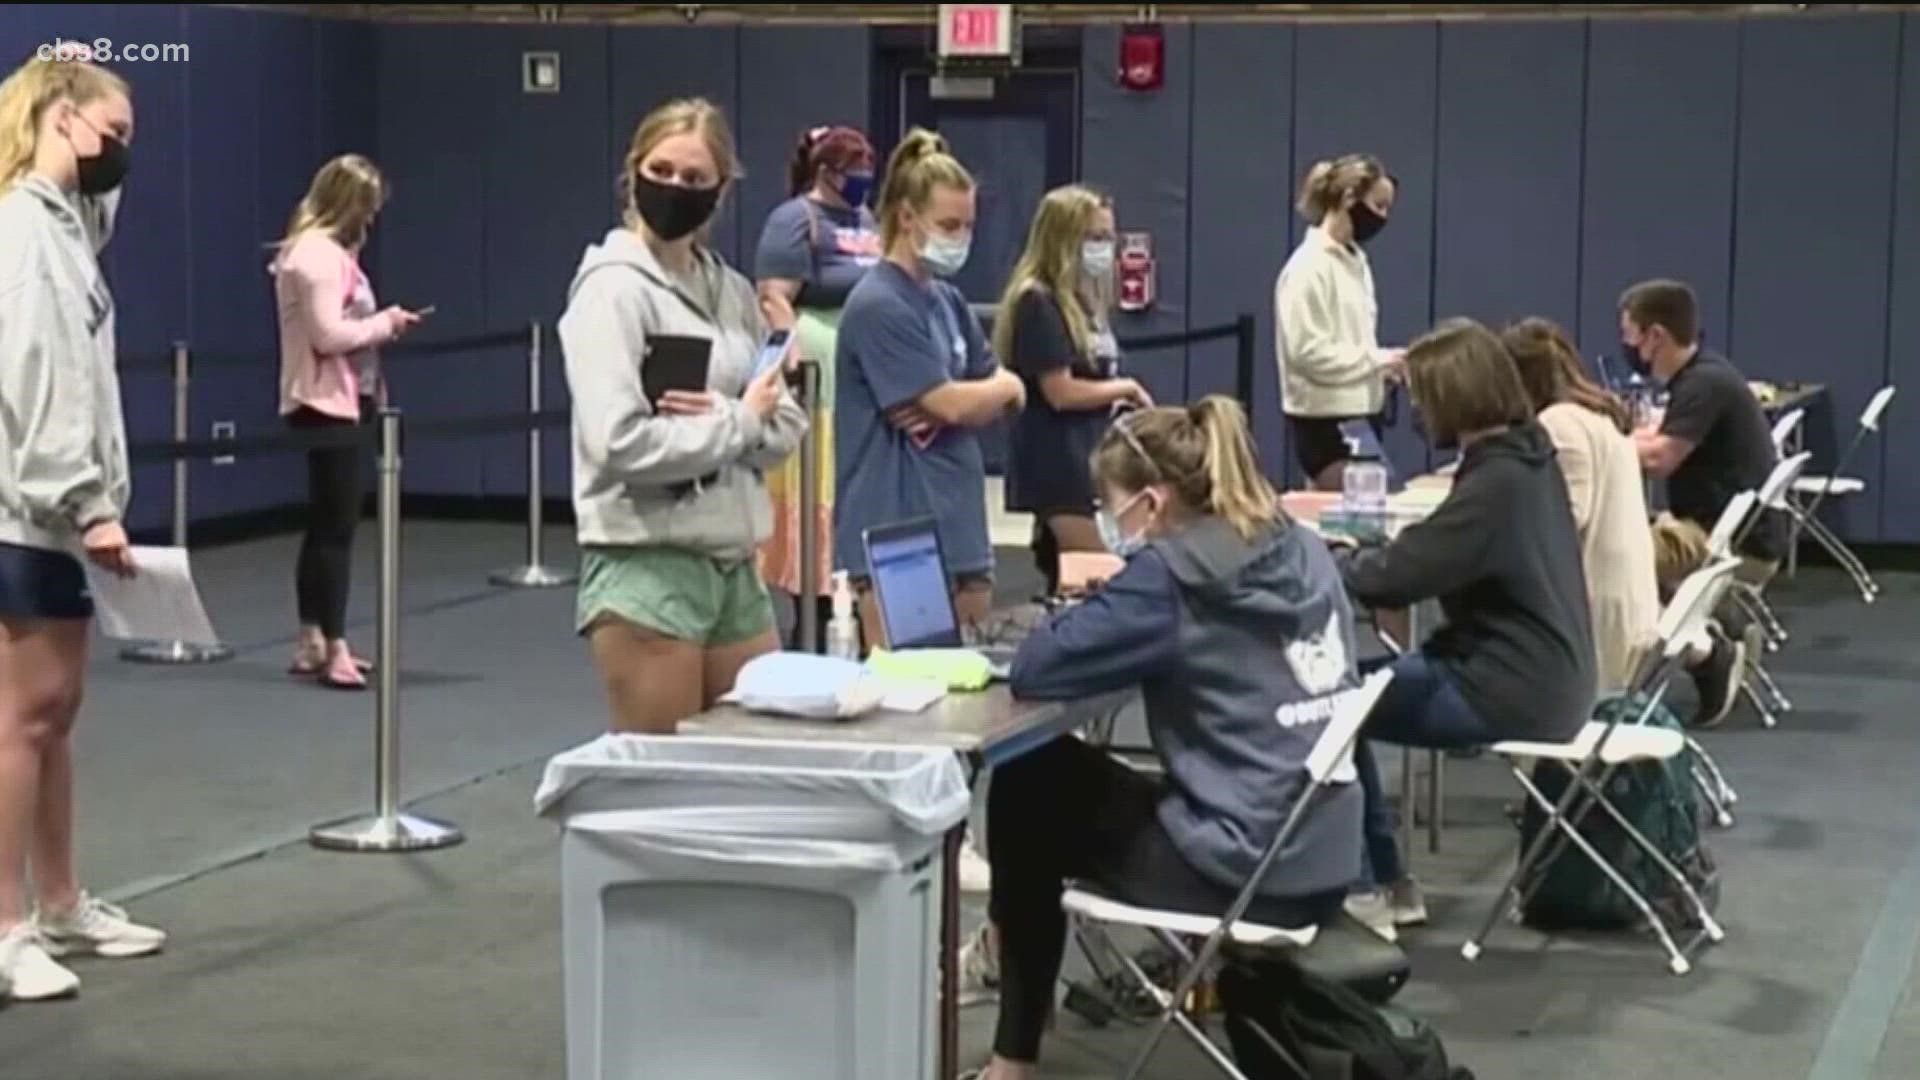 A state lawmaker introduced a bill that would allow school districts access to an immunization registry to see if a student is vaccinated against COVID-19.